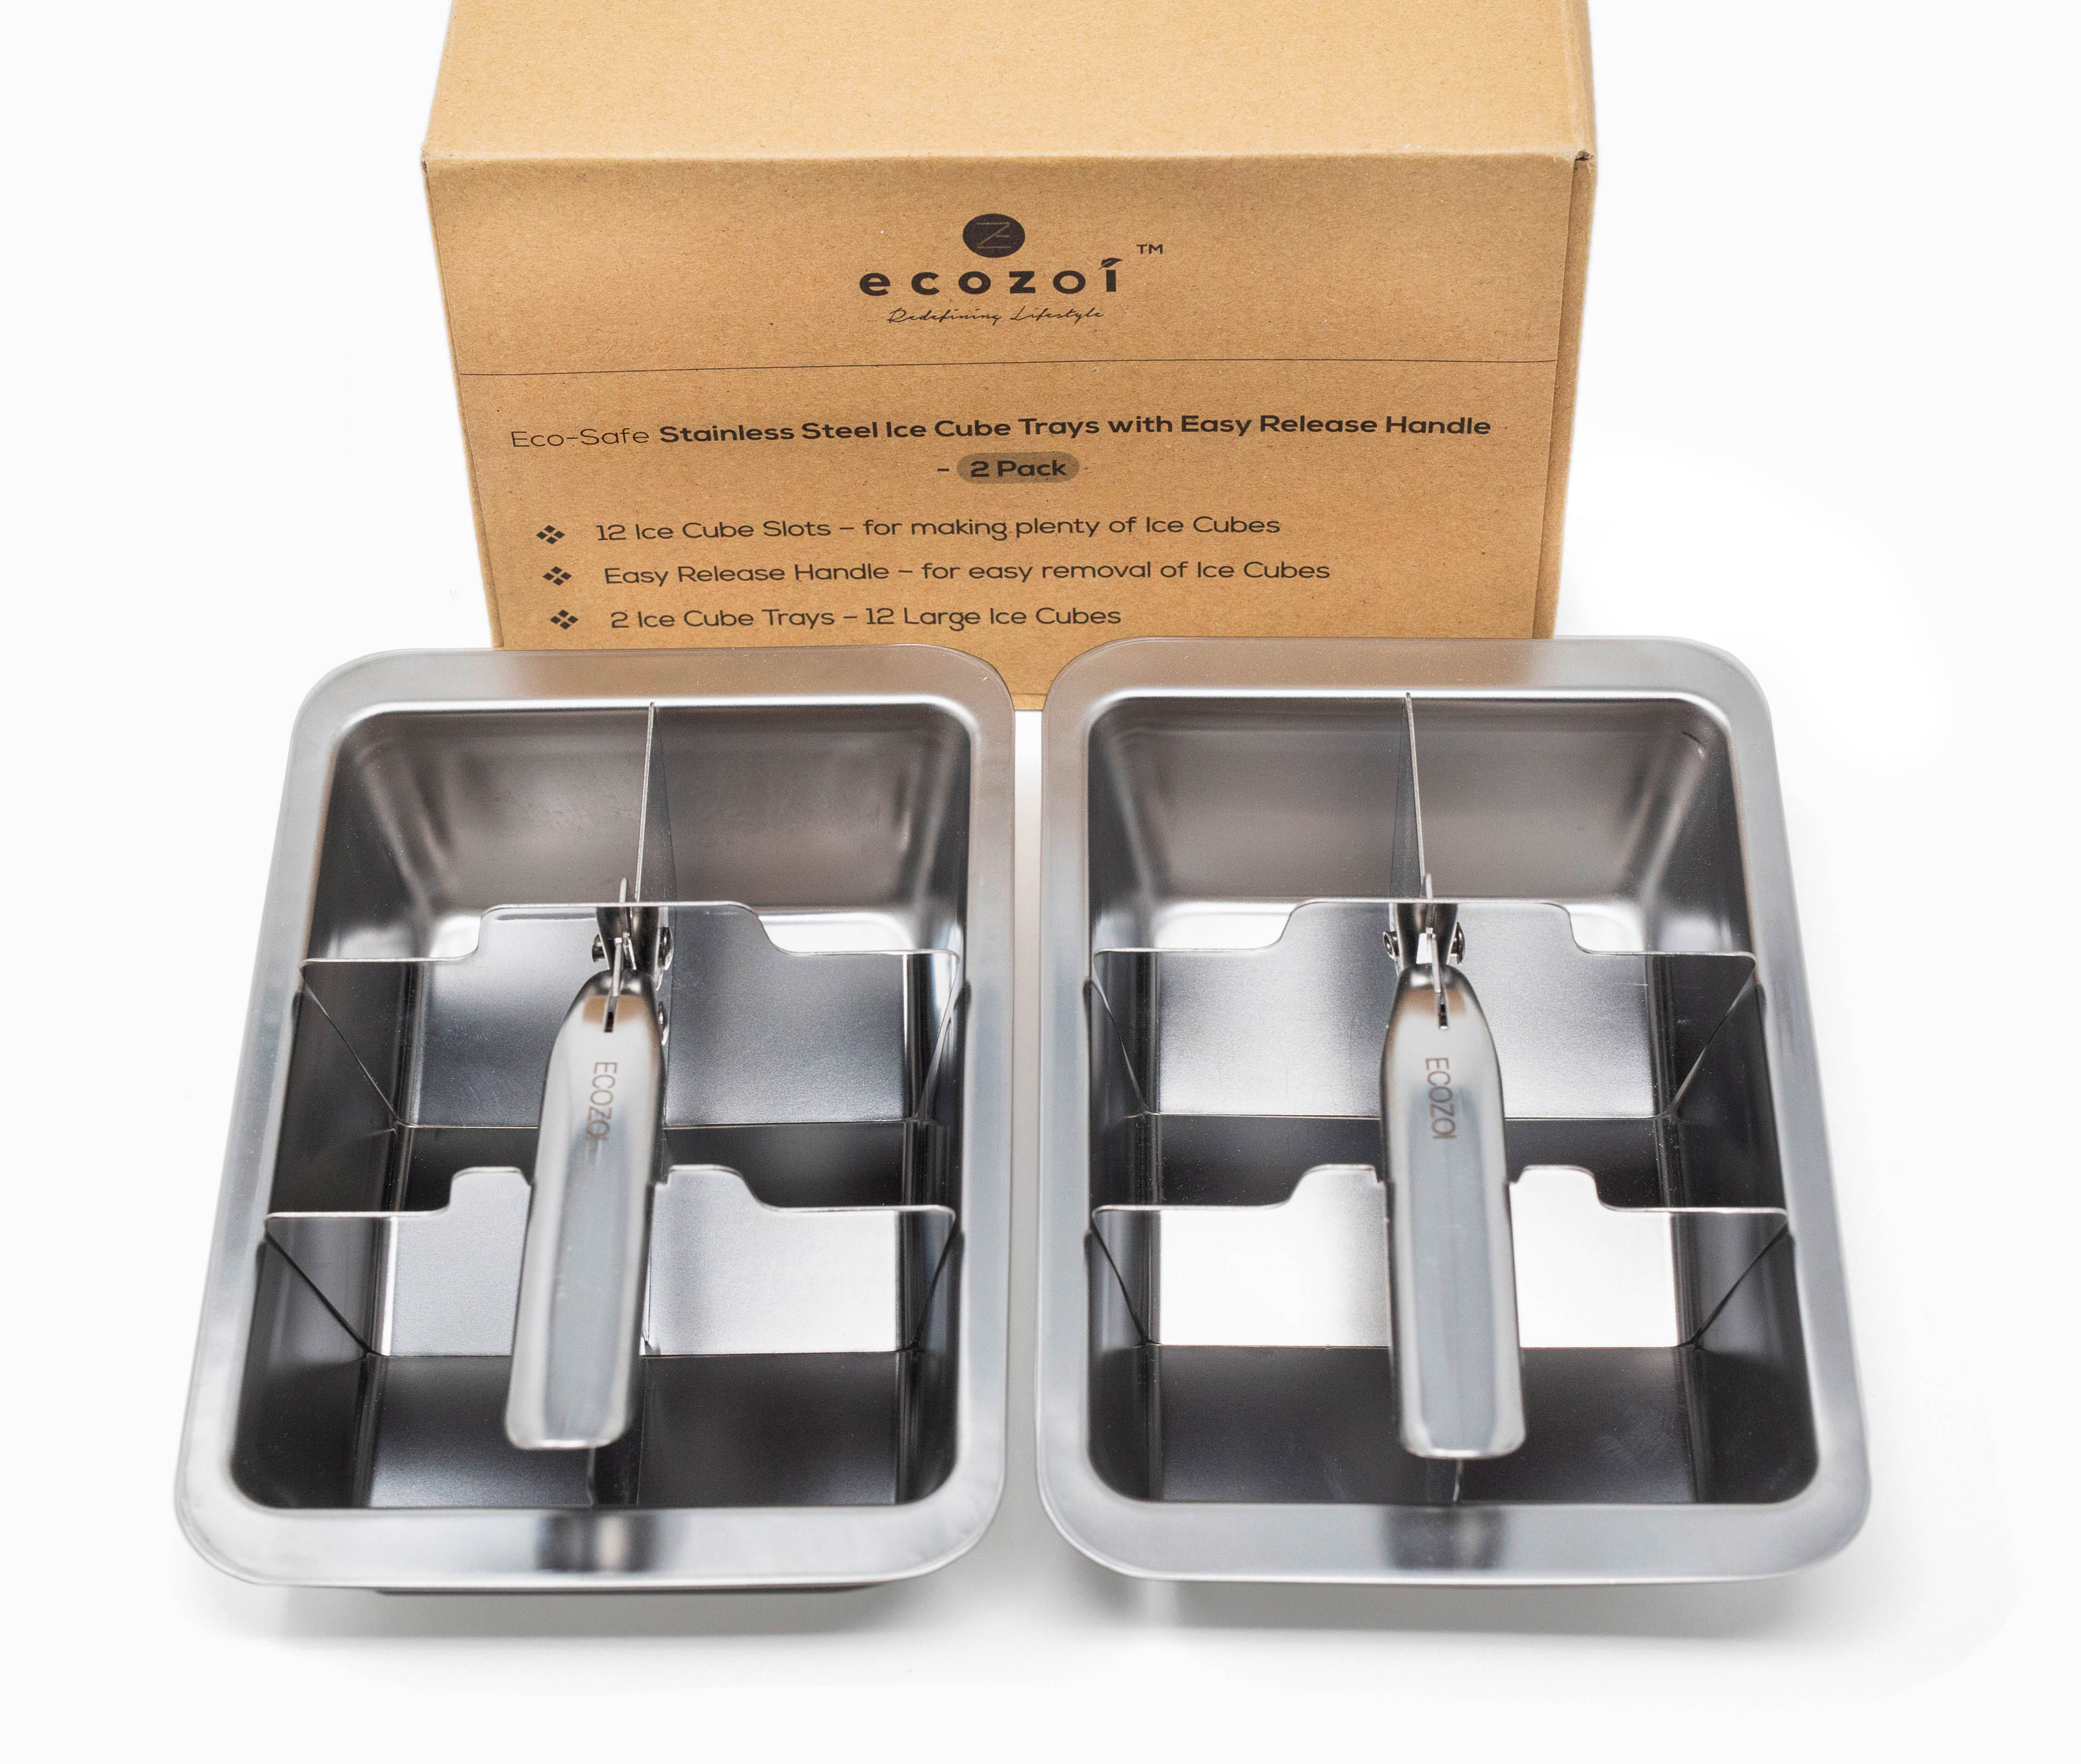 Ecozoi Stainless Steel Ice Cube Trays - 2 PACK - with Easy Release Handle  freeshipping - ecozoi